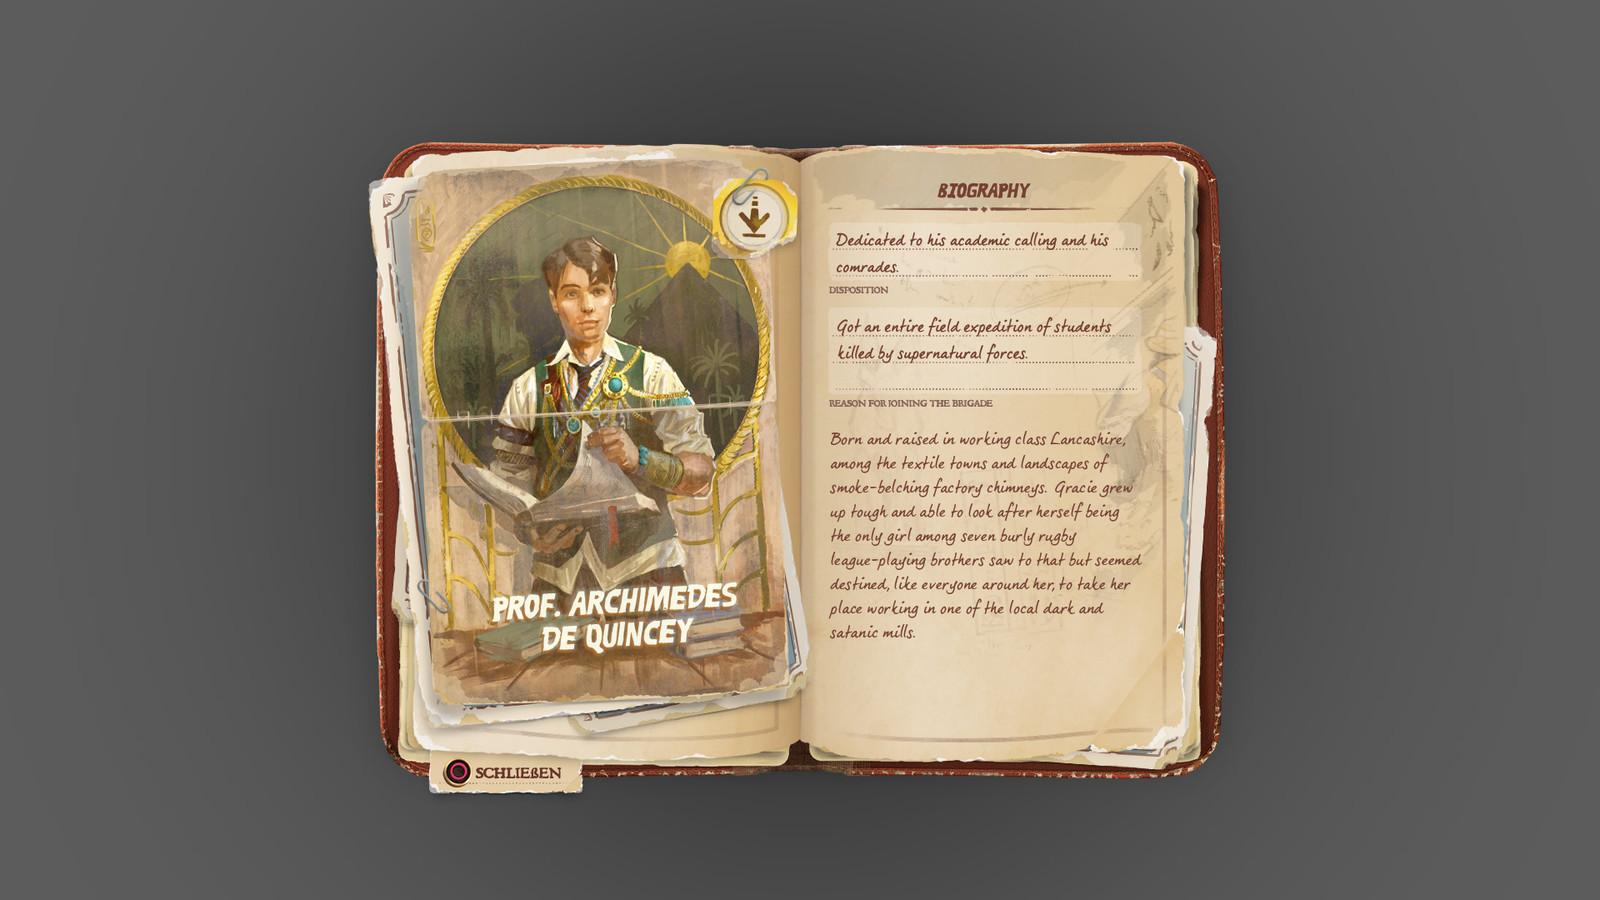 Each member of the Strange Brigade has a little biography that gives the player an insight into each of their origins and motivations. All character paintings used on the folded postcard were produced by the awesome @edwardca!